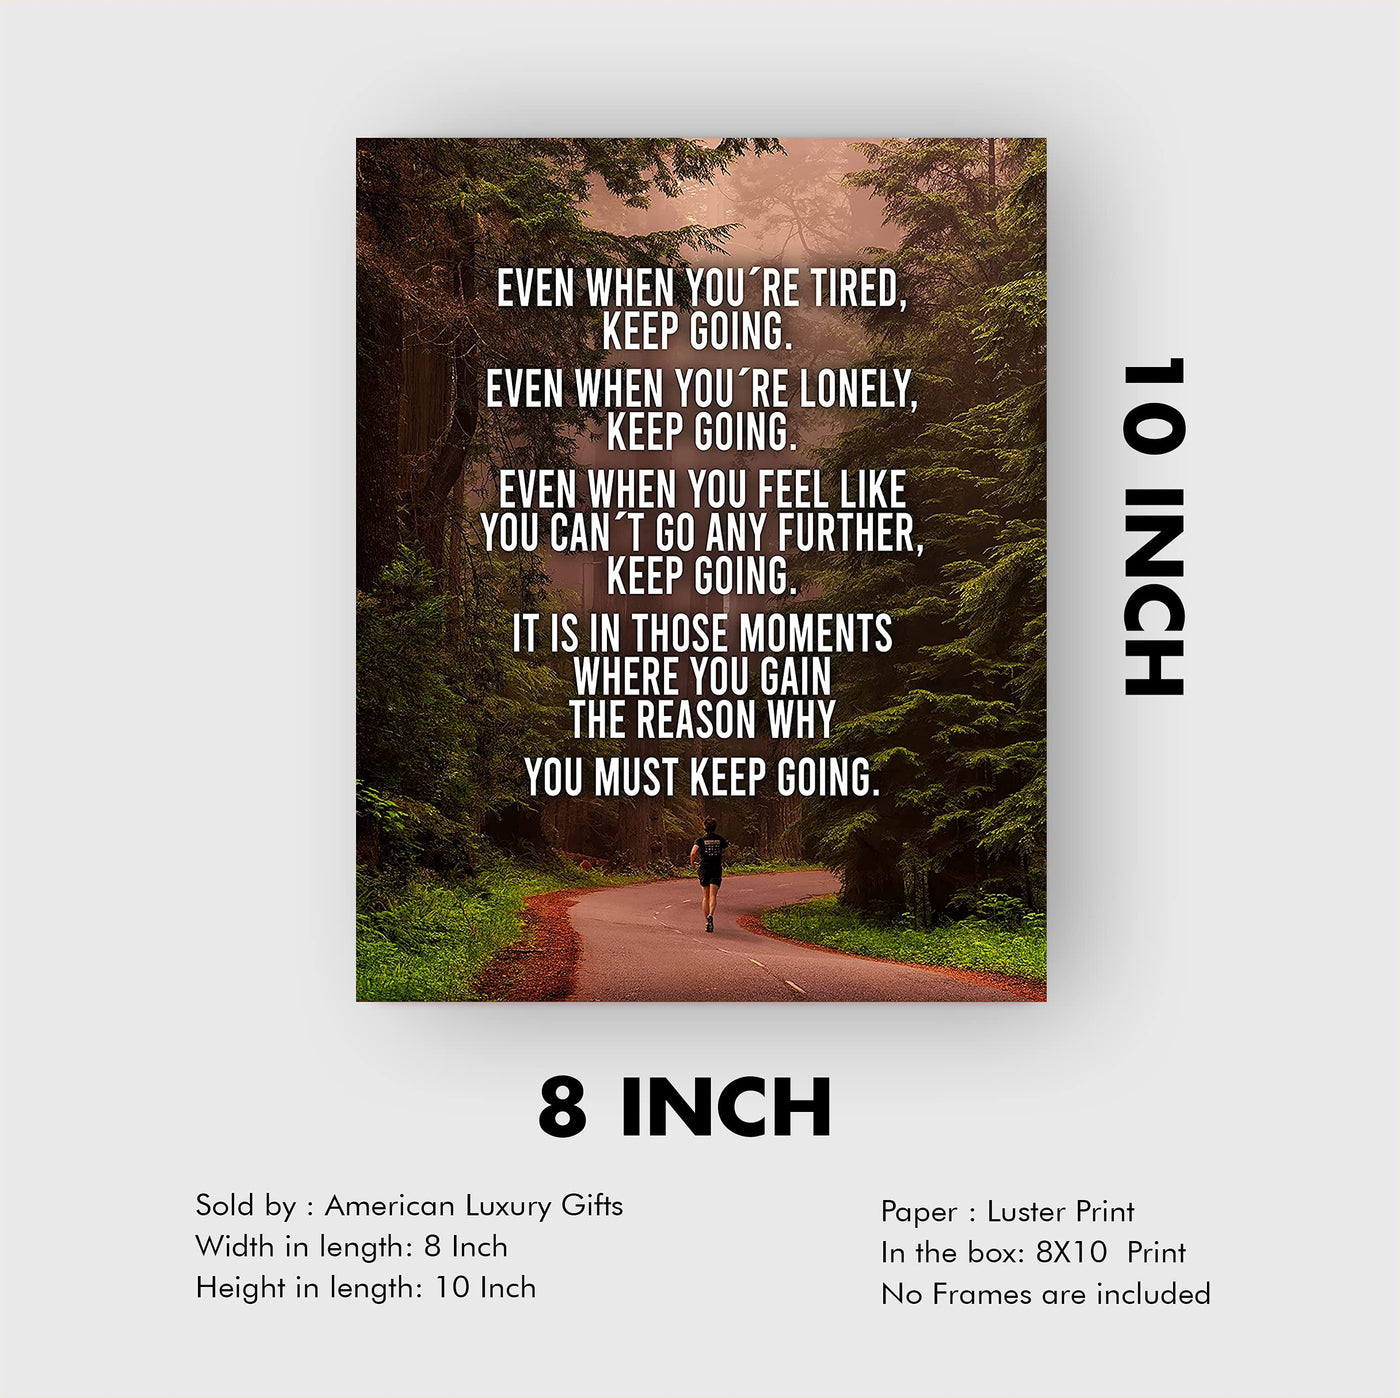 Even When You're Tired-Keep Going Inspirational Wall Art Print -8 x 10" Motivational Woods Picture Print-Ready to Frame. Perfect Home-Office-Studio-School-Dorm Decor. Great Gift for Inspiration!